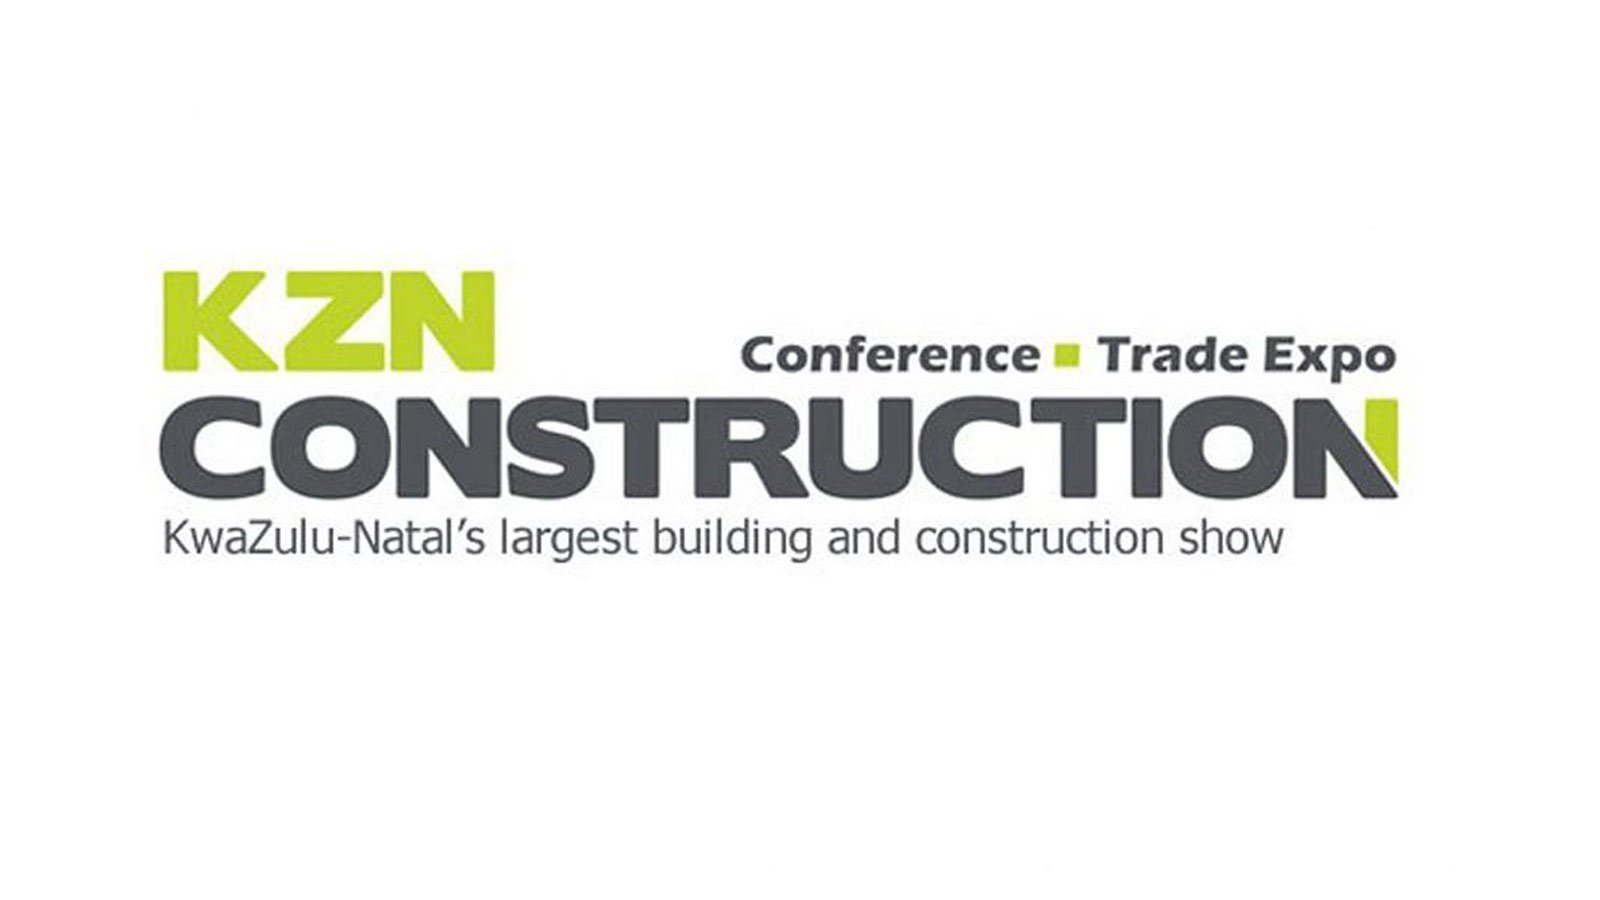 Asite to exhibit at the KZN Construction Expo in Durban